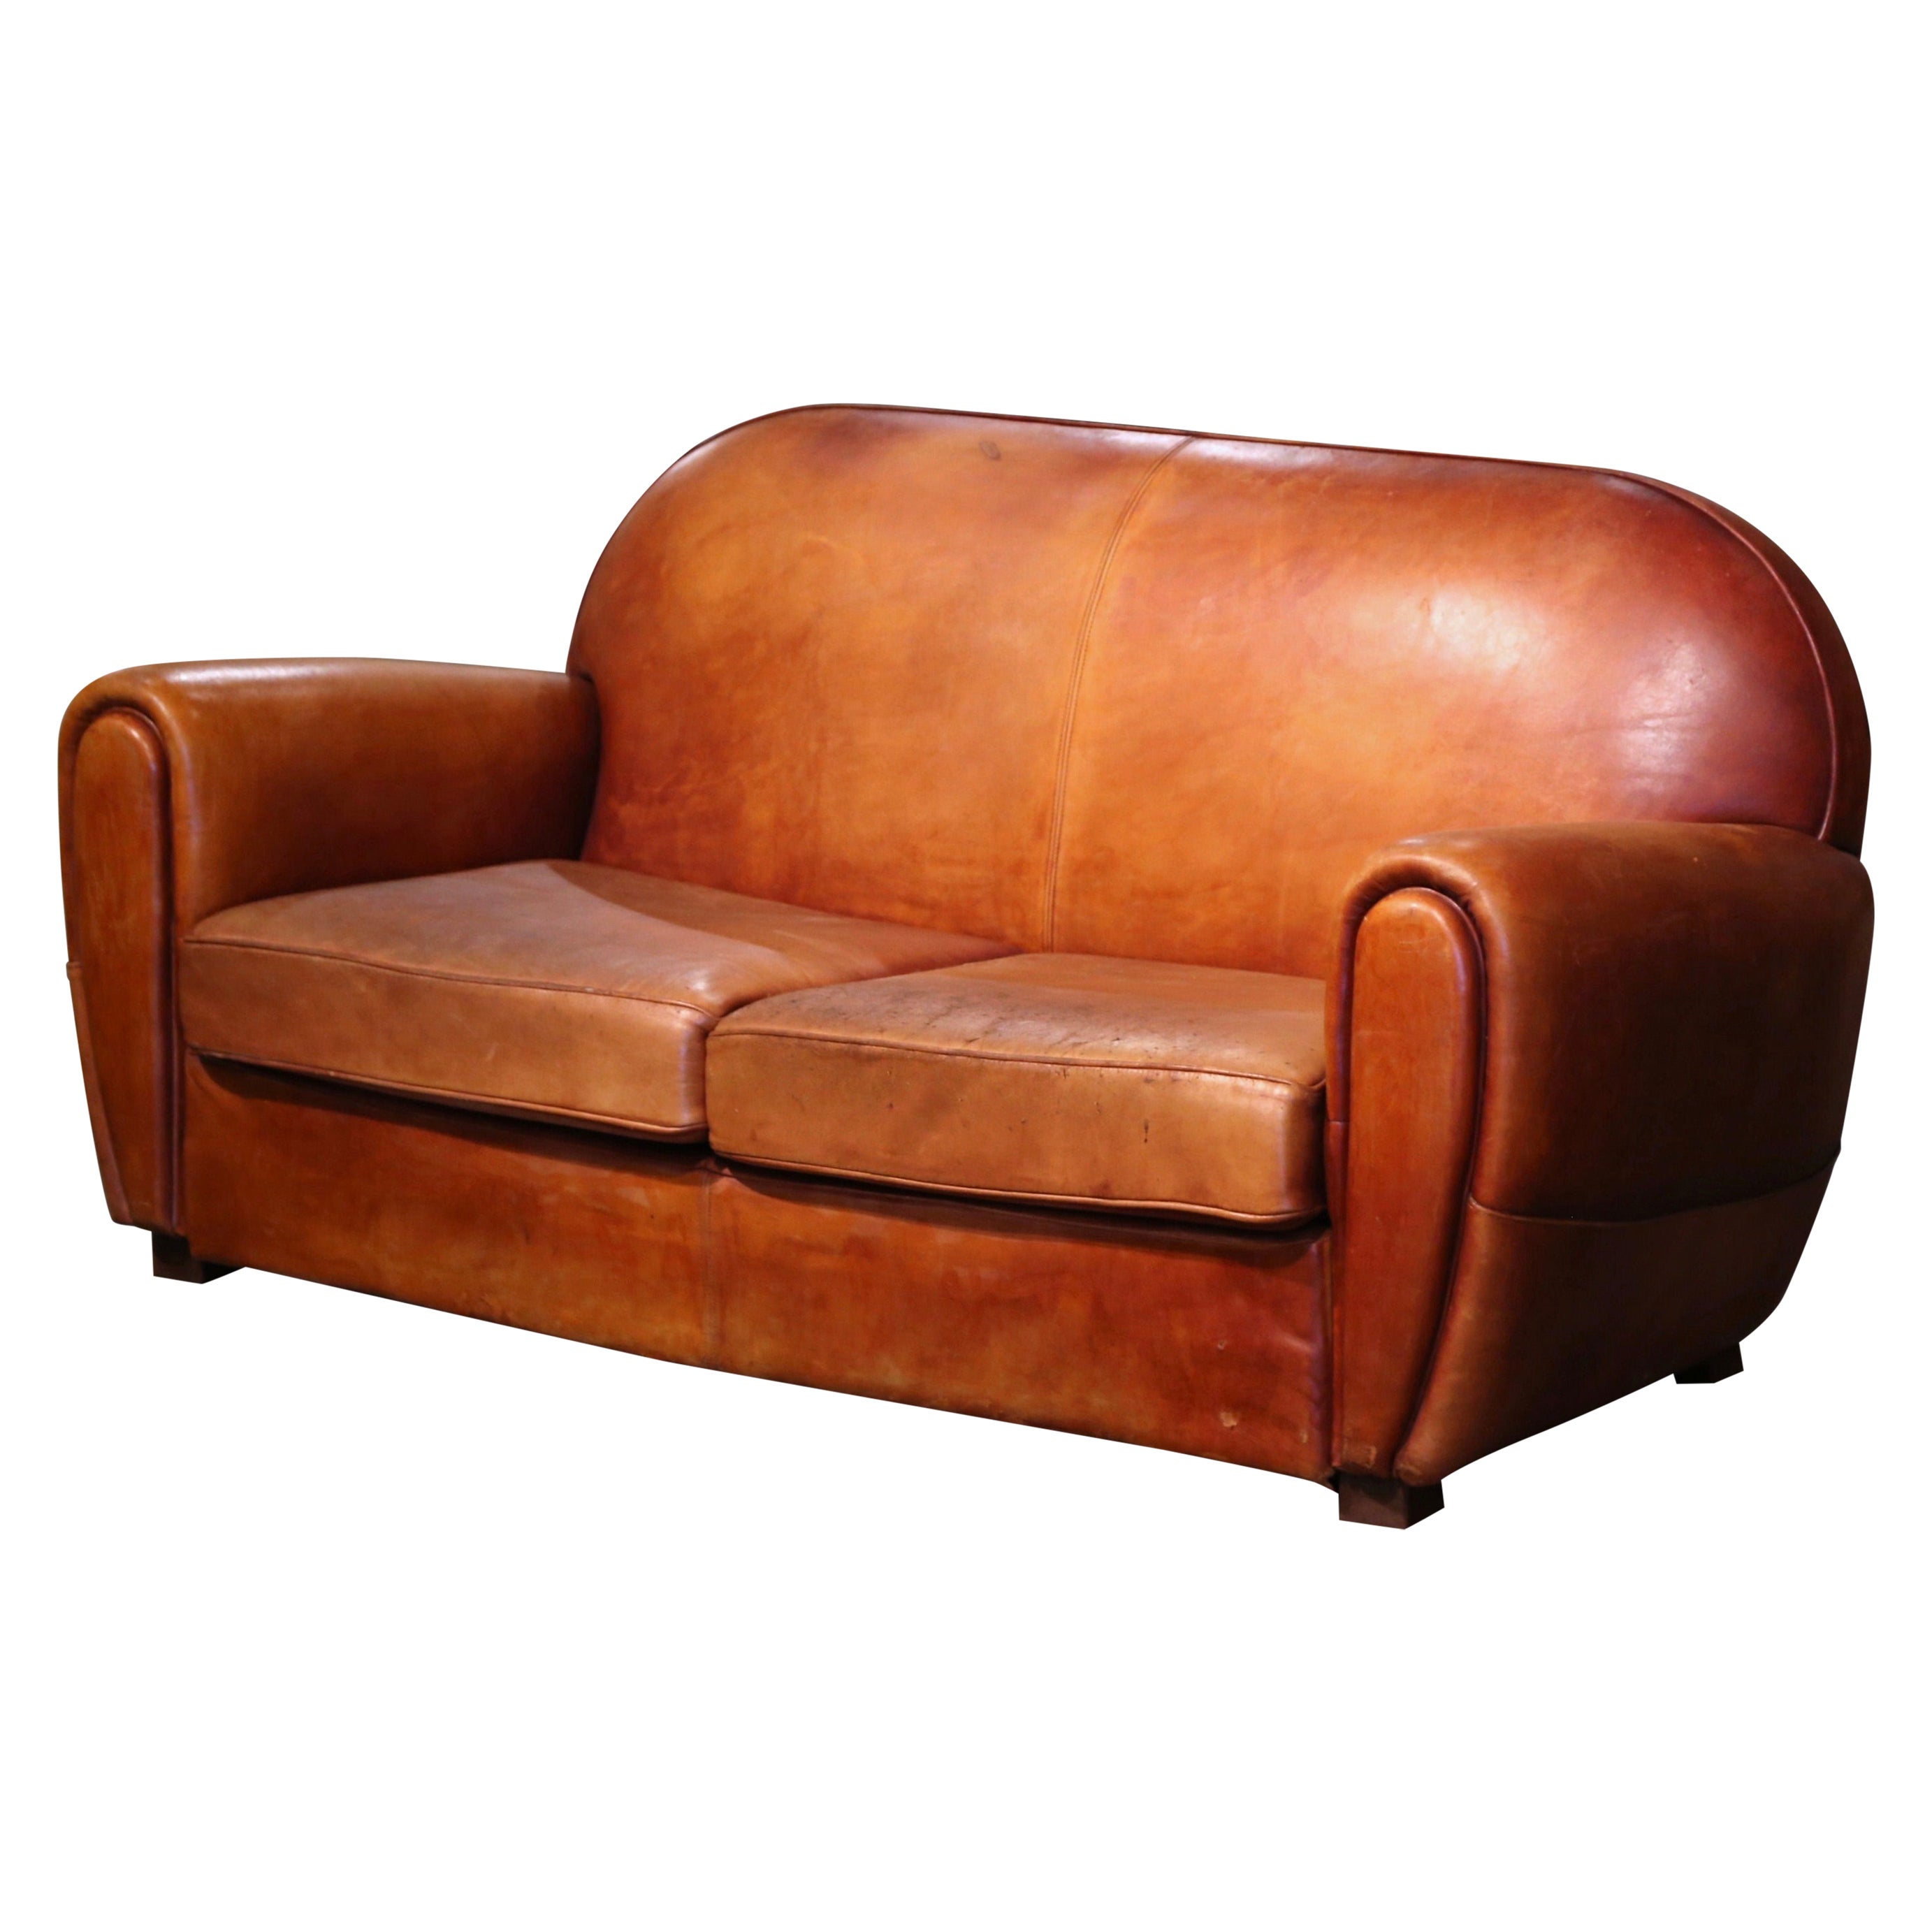 Early 20th Century French Art-Deco Brown Leather Two-Seat Club Sofa For Sale